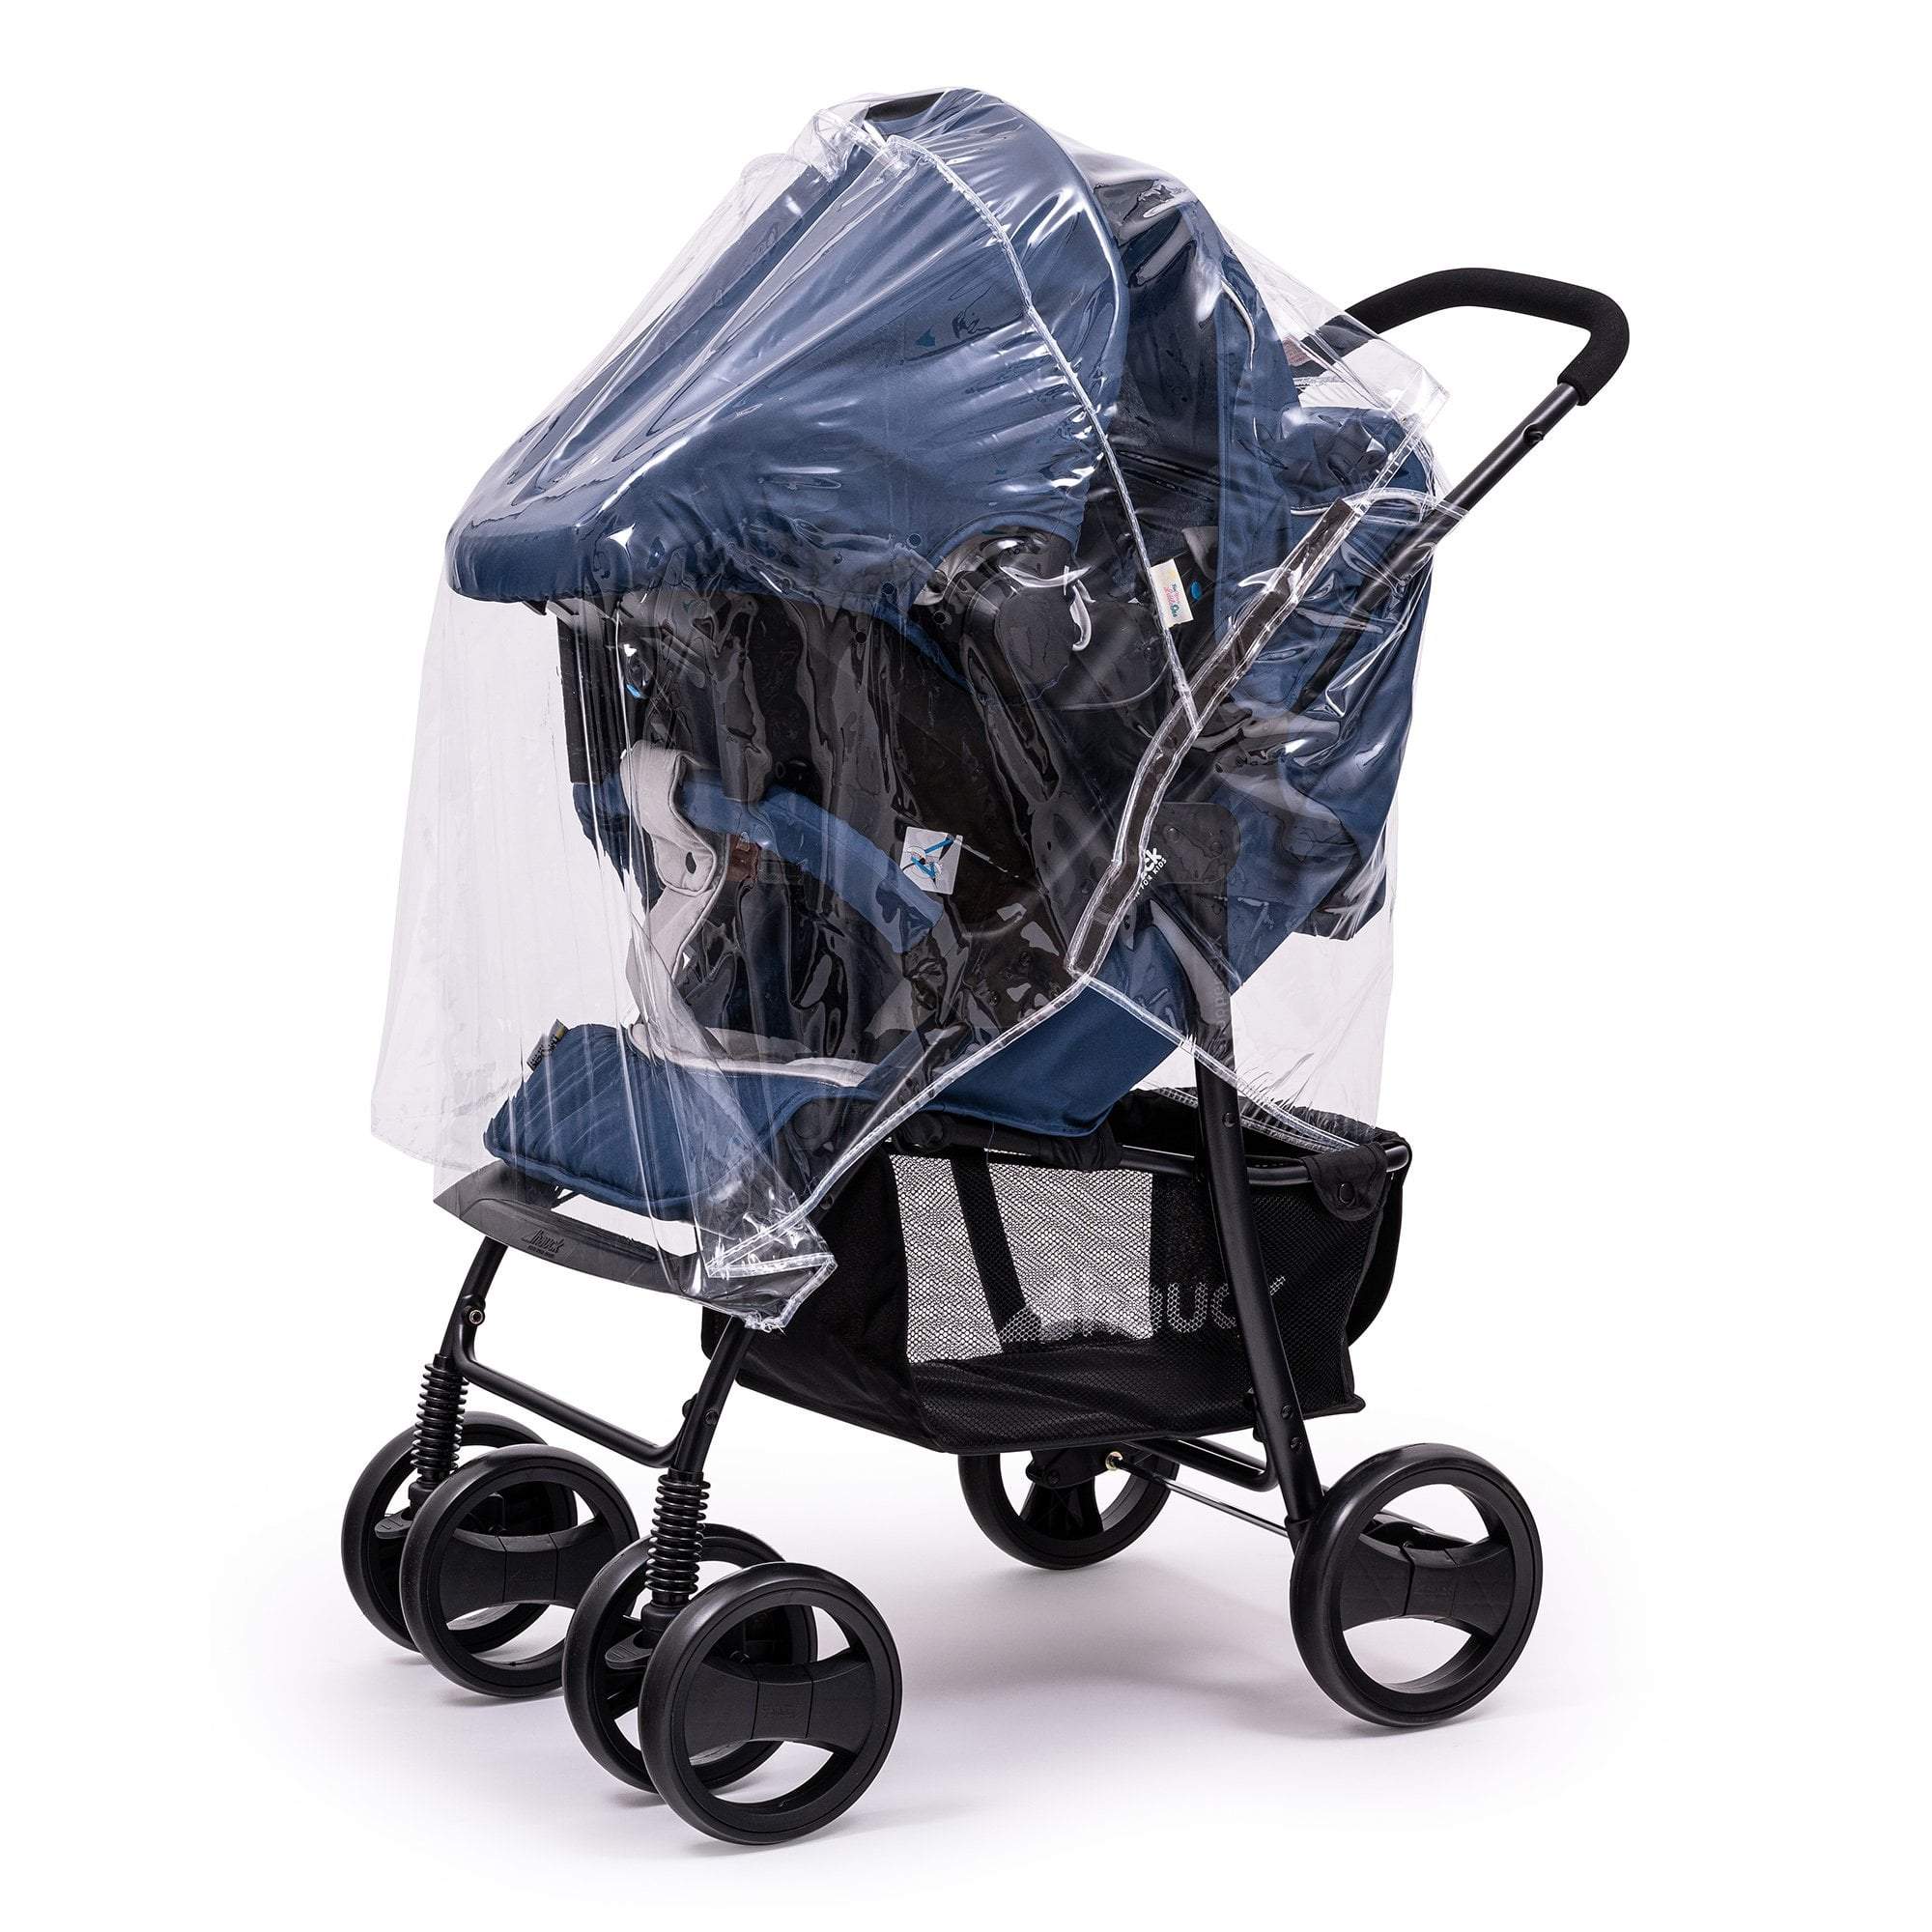 Travel System Raincover Compatible with Out 'n' About - Fits All Models -  | For Your Little One